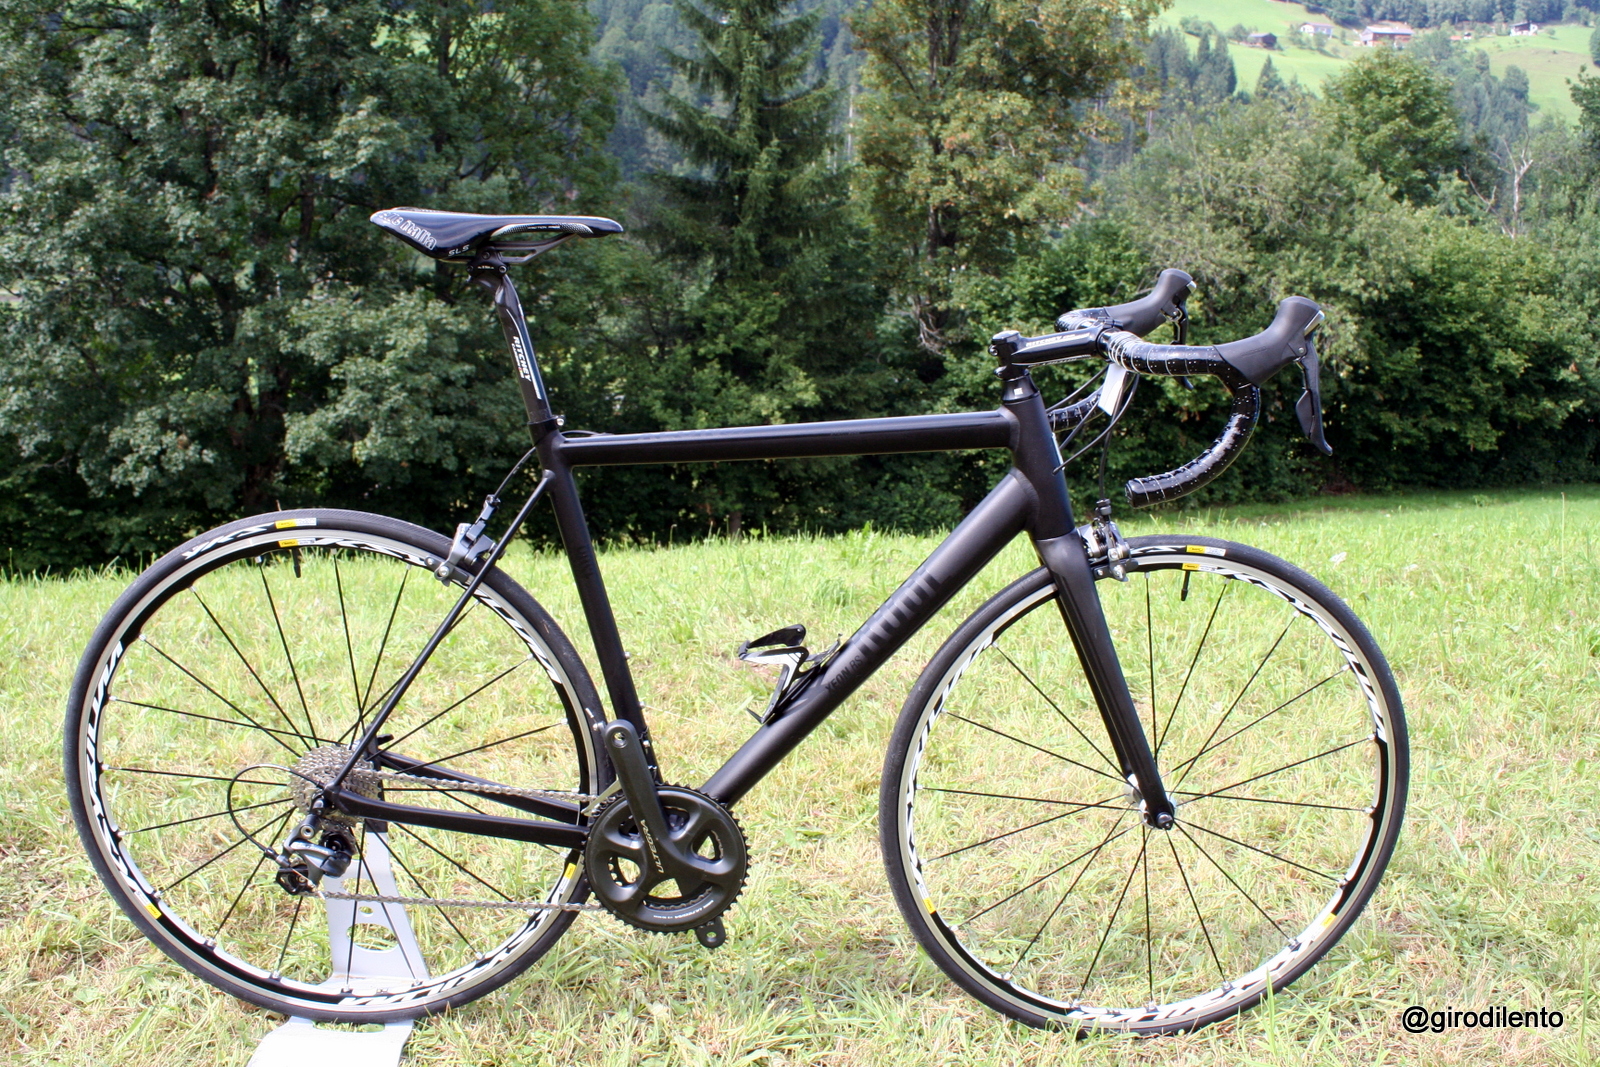 New superlight Rose Xeon RS seen here in anodised black with Ultegra 6800